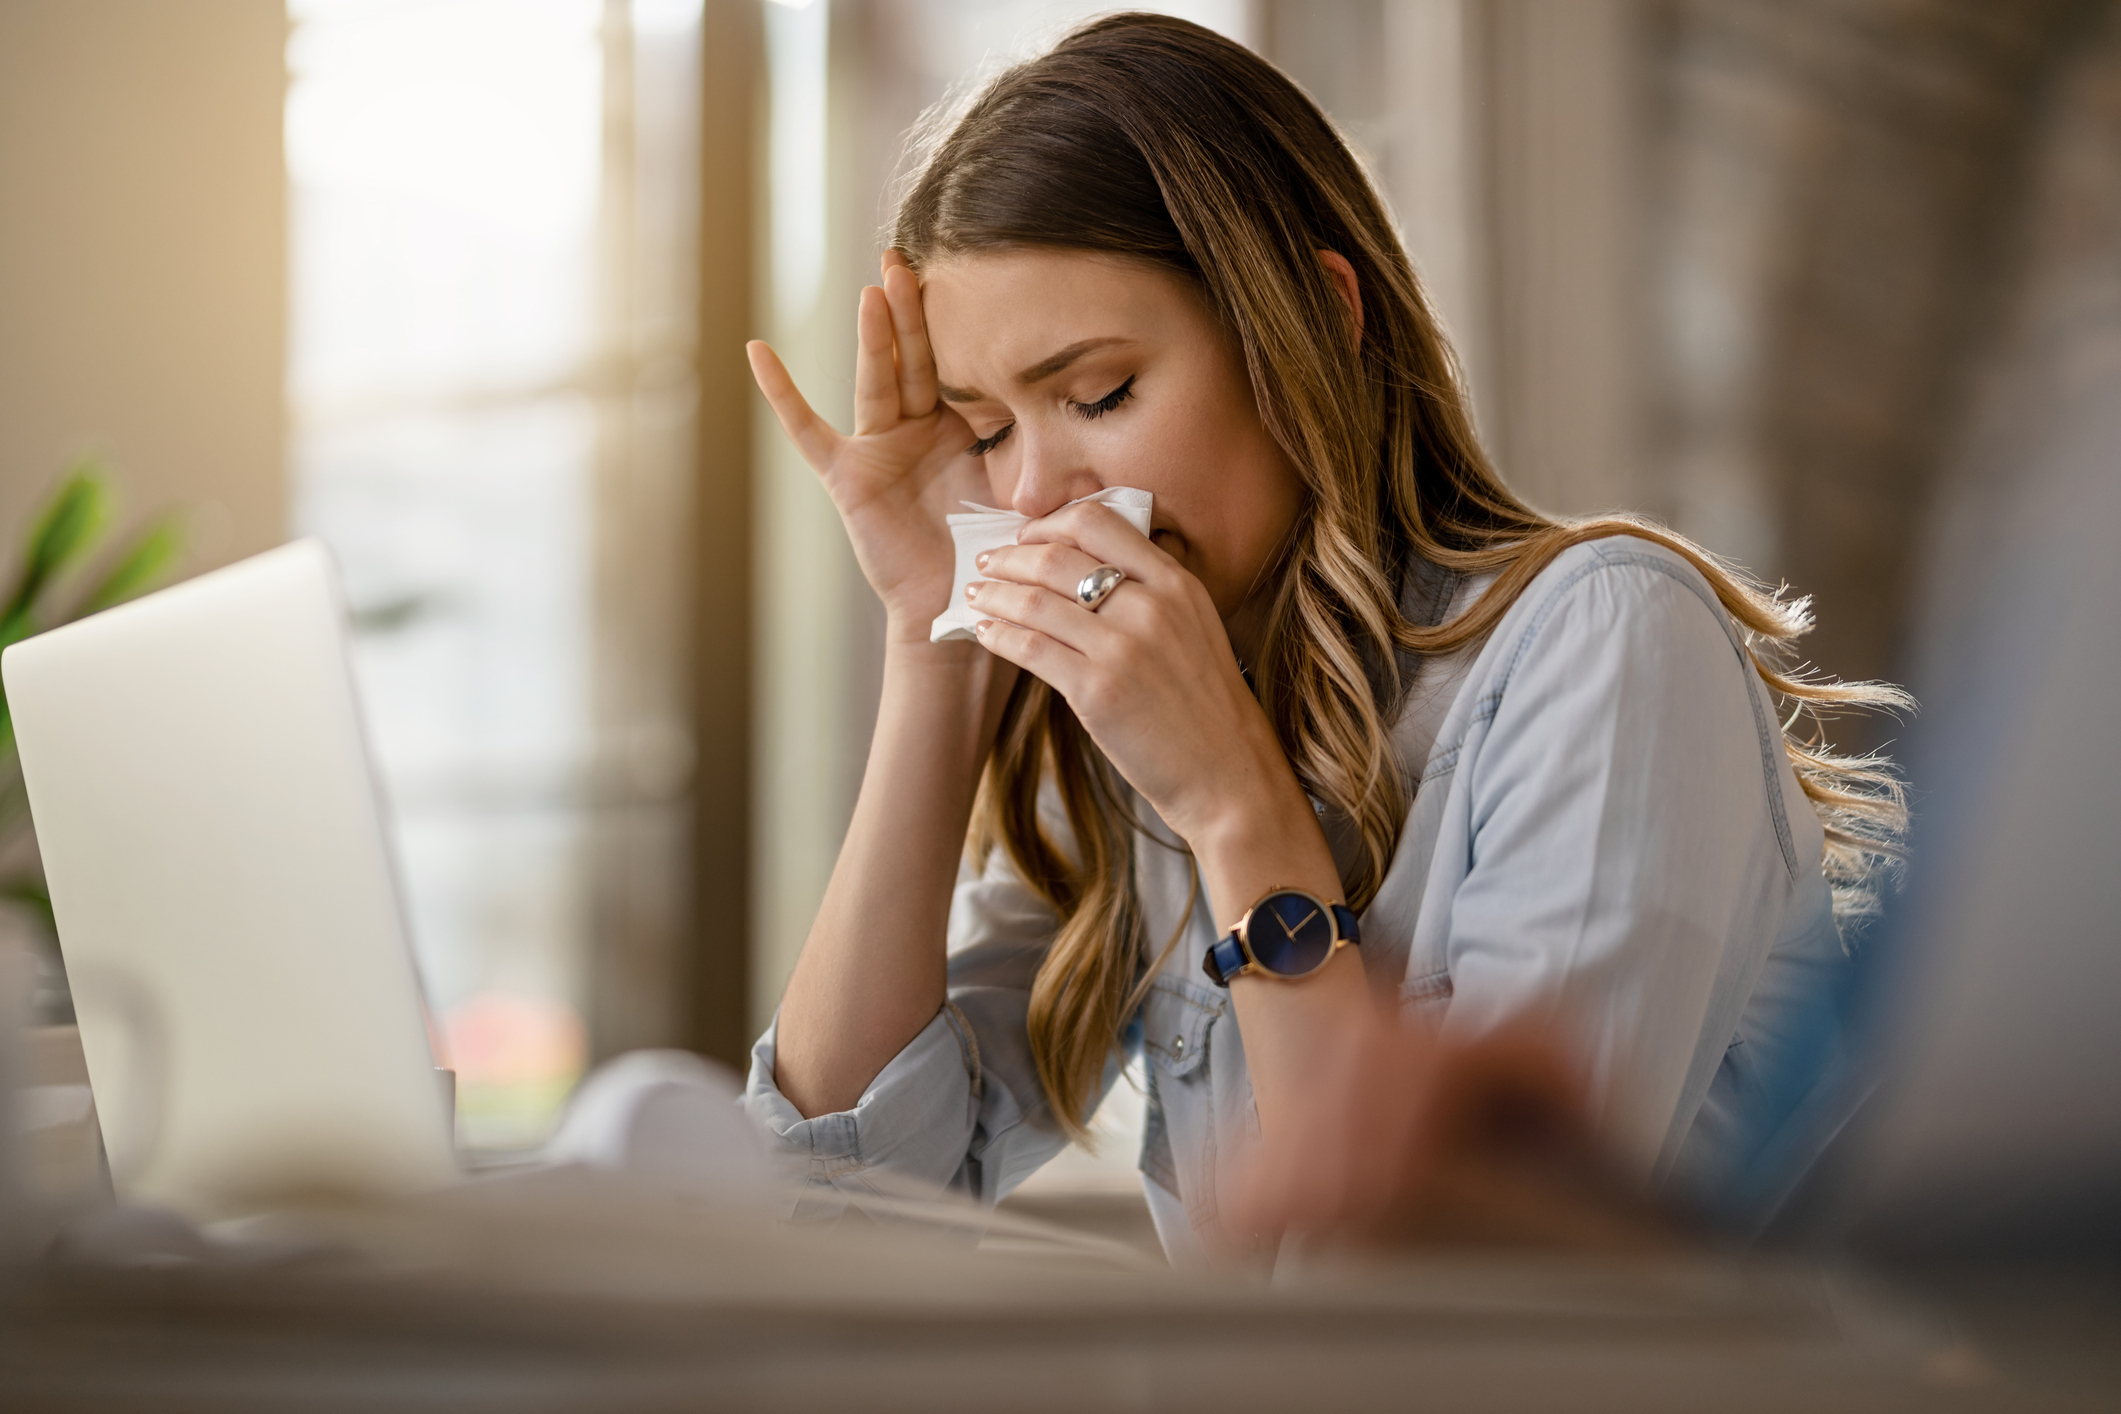 An image of a woman with postnasal drip wiping her nose with a tissue.